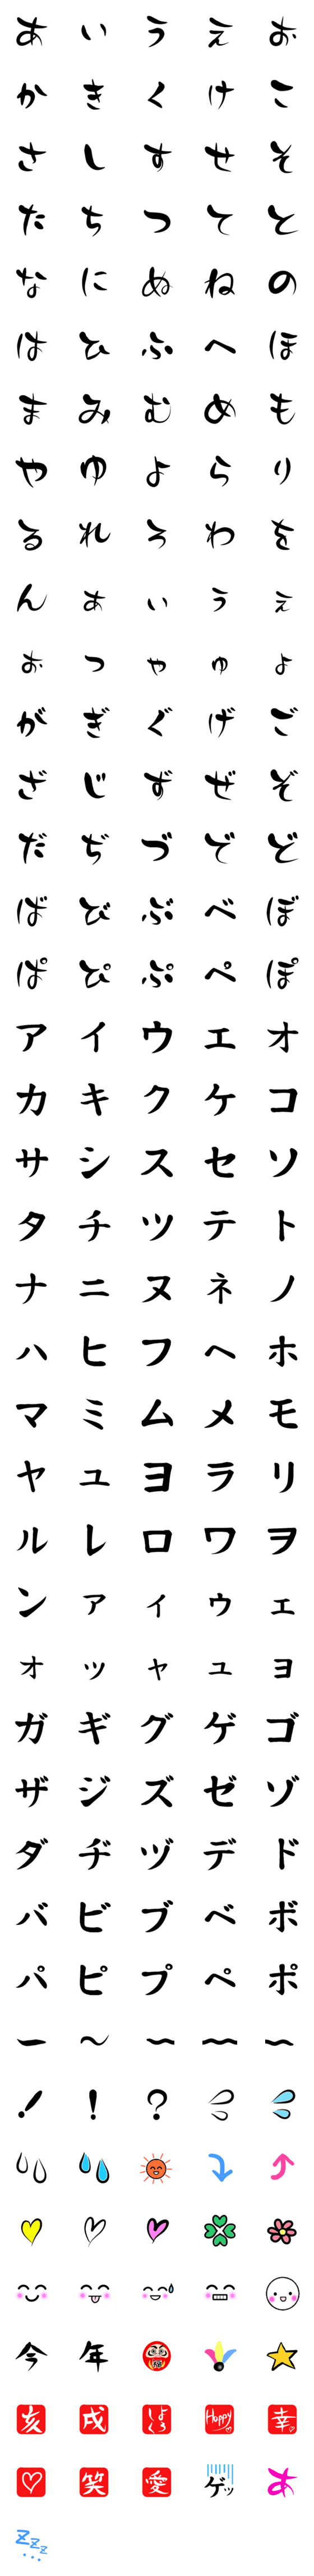 [LINE絵文字]アートな筆文字の画像一覧